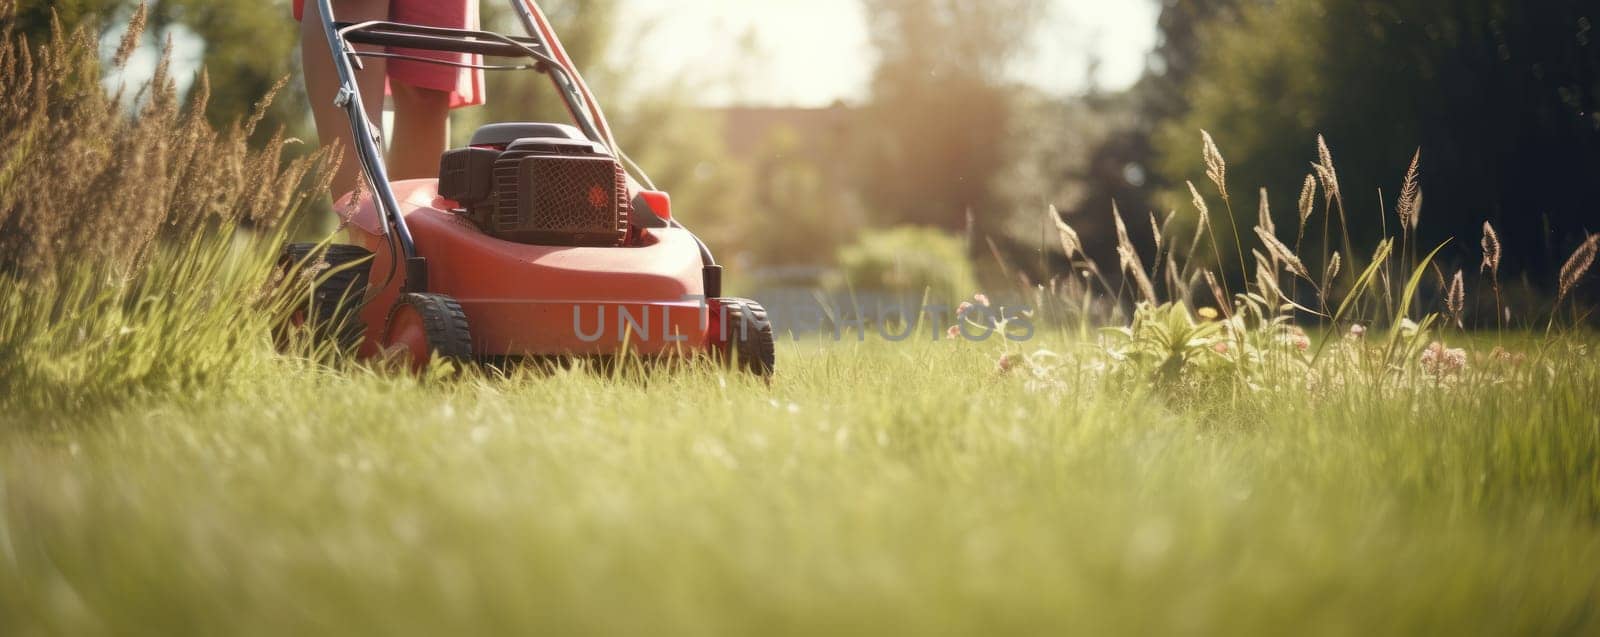 woman in boots and protective workwear cutting the grass with a riding lawnmower on a sunny day by Sorapop